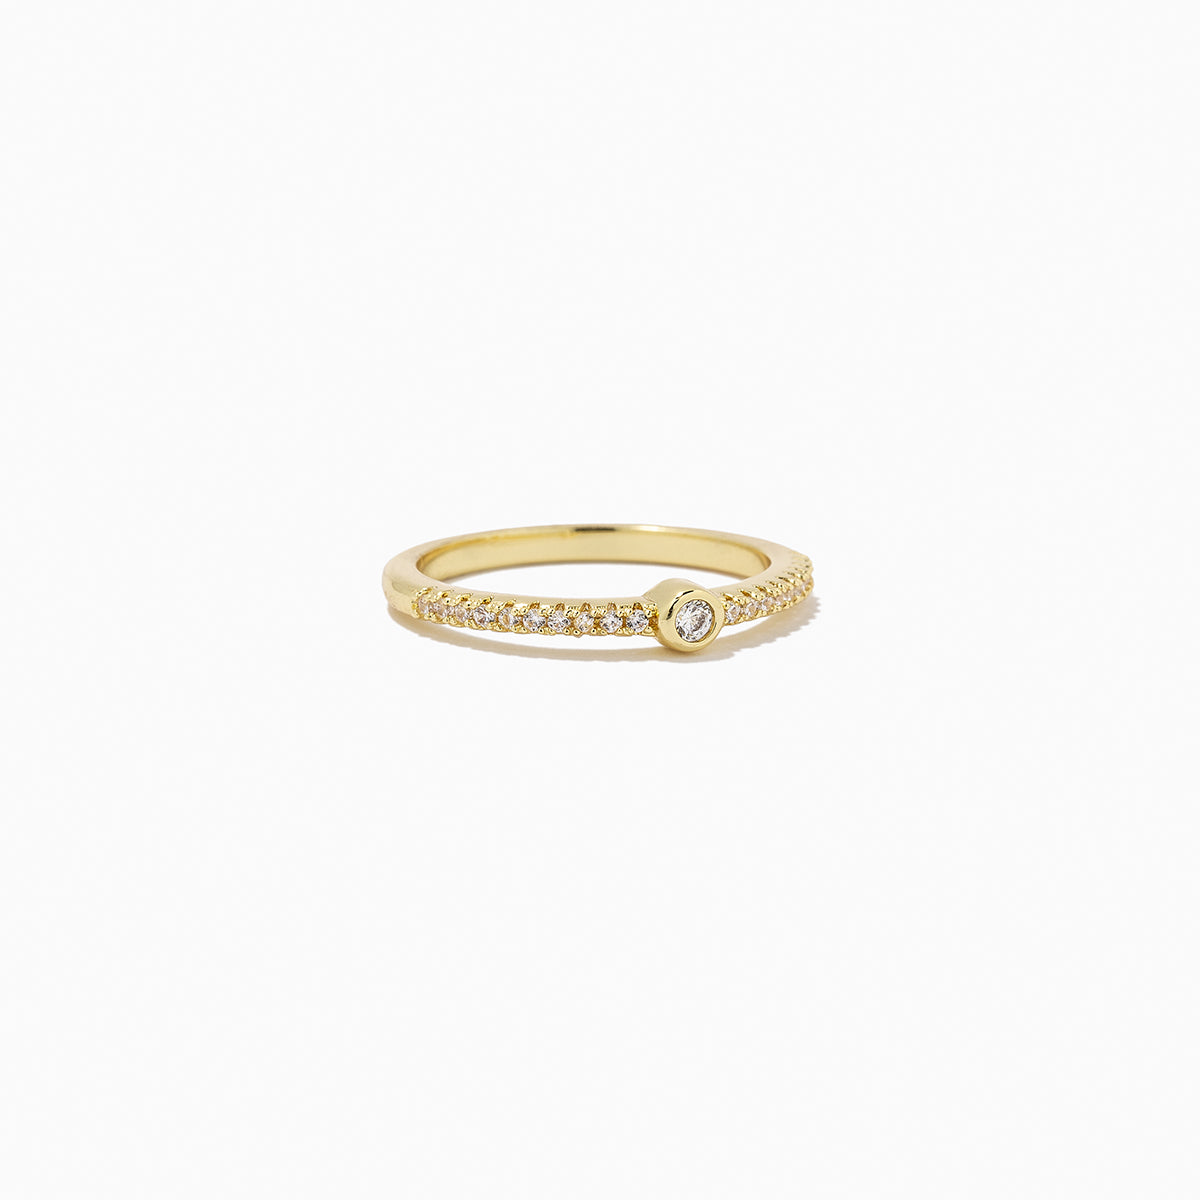 Middle Ground Ring | Gold | Product Image | Uncommon James